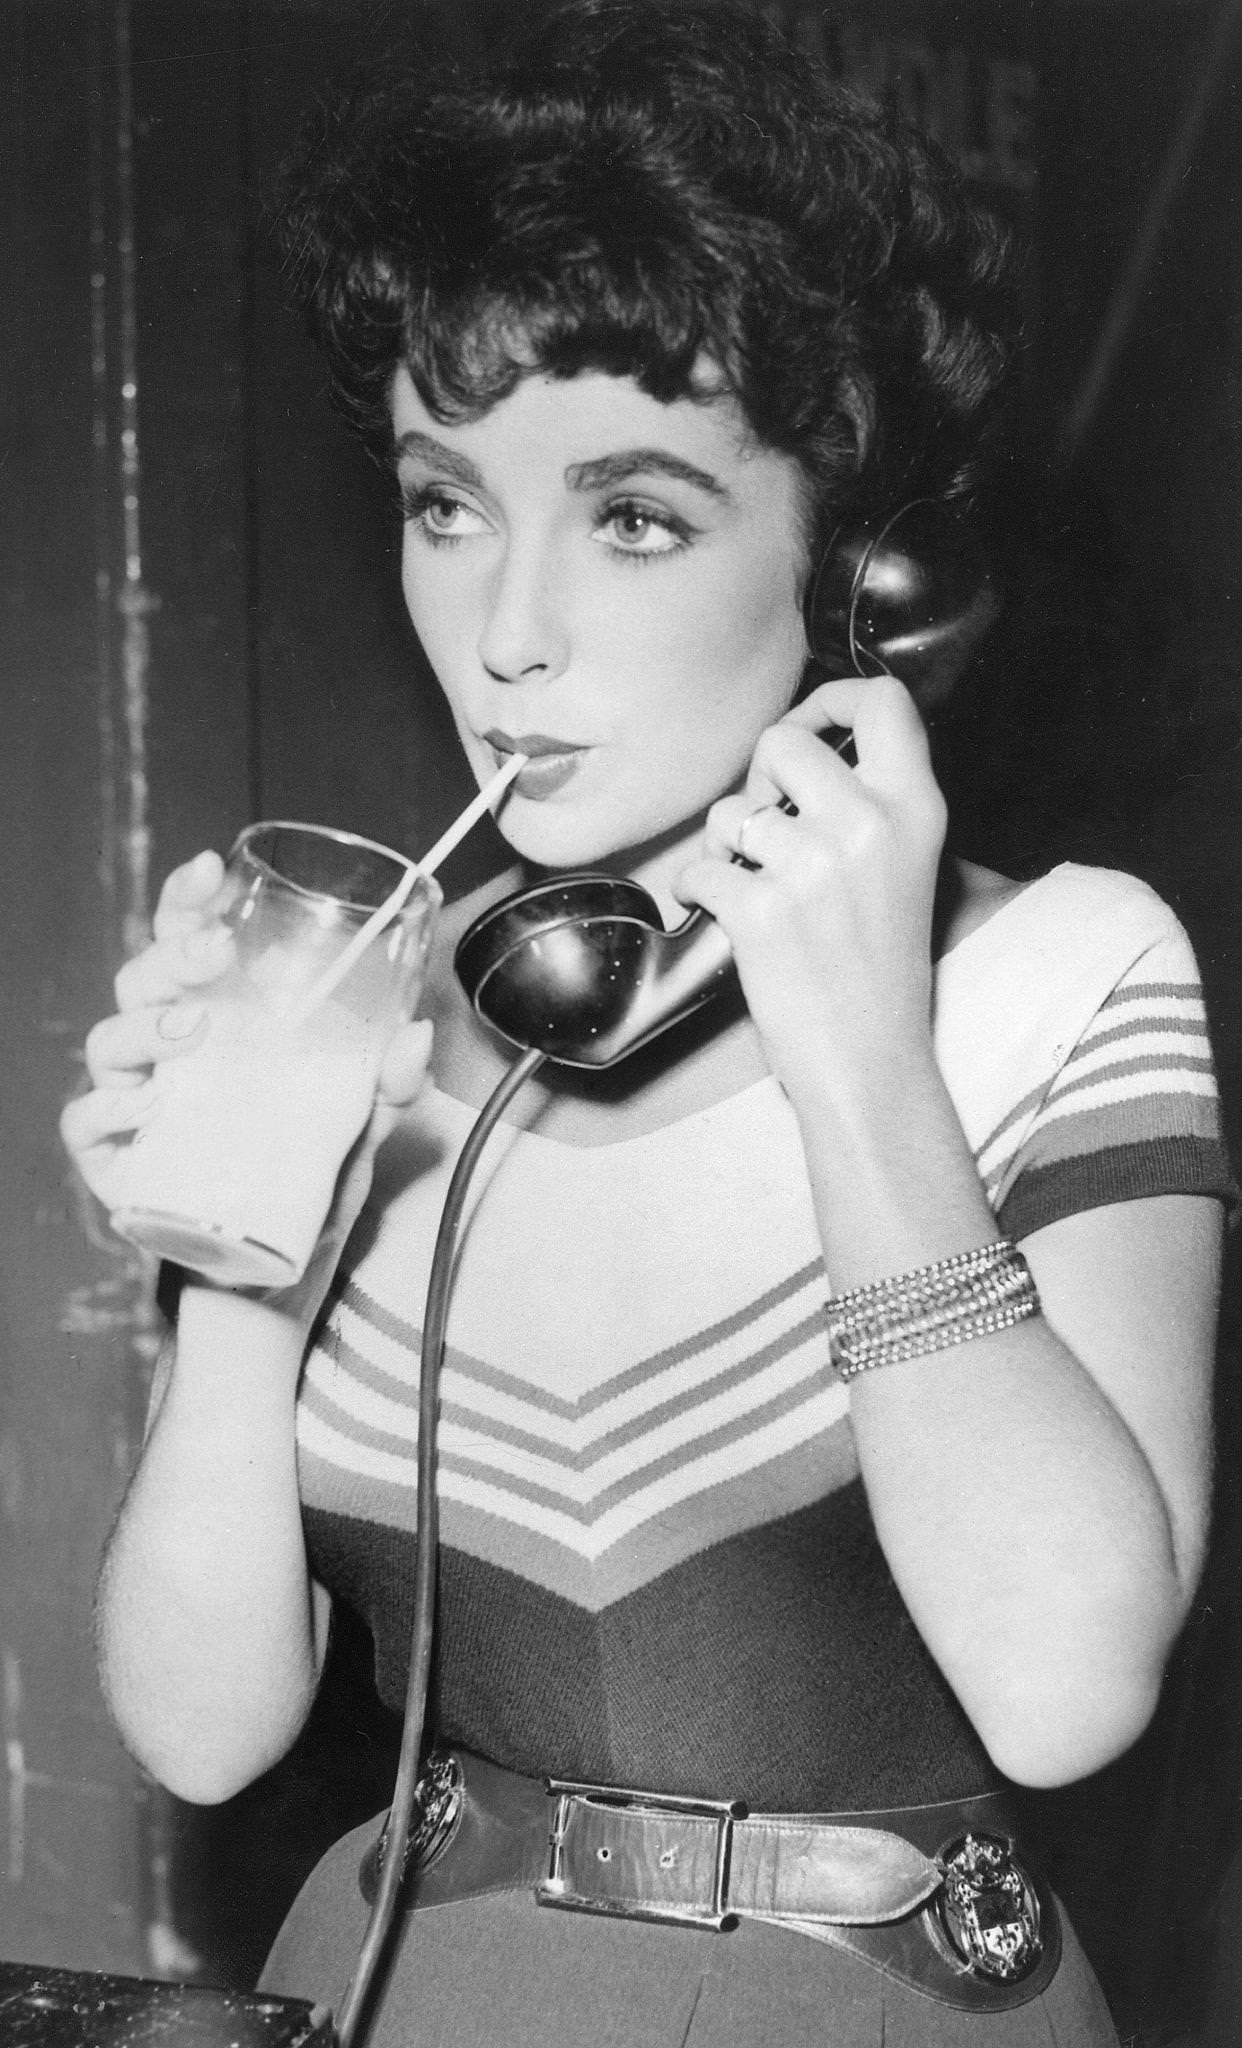 Elizabeth Taylor with a phone and milk glass during the filming of 'Girl Who Had Everything' (1953), USA.